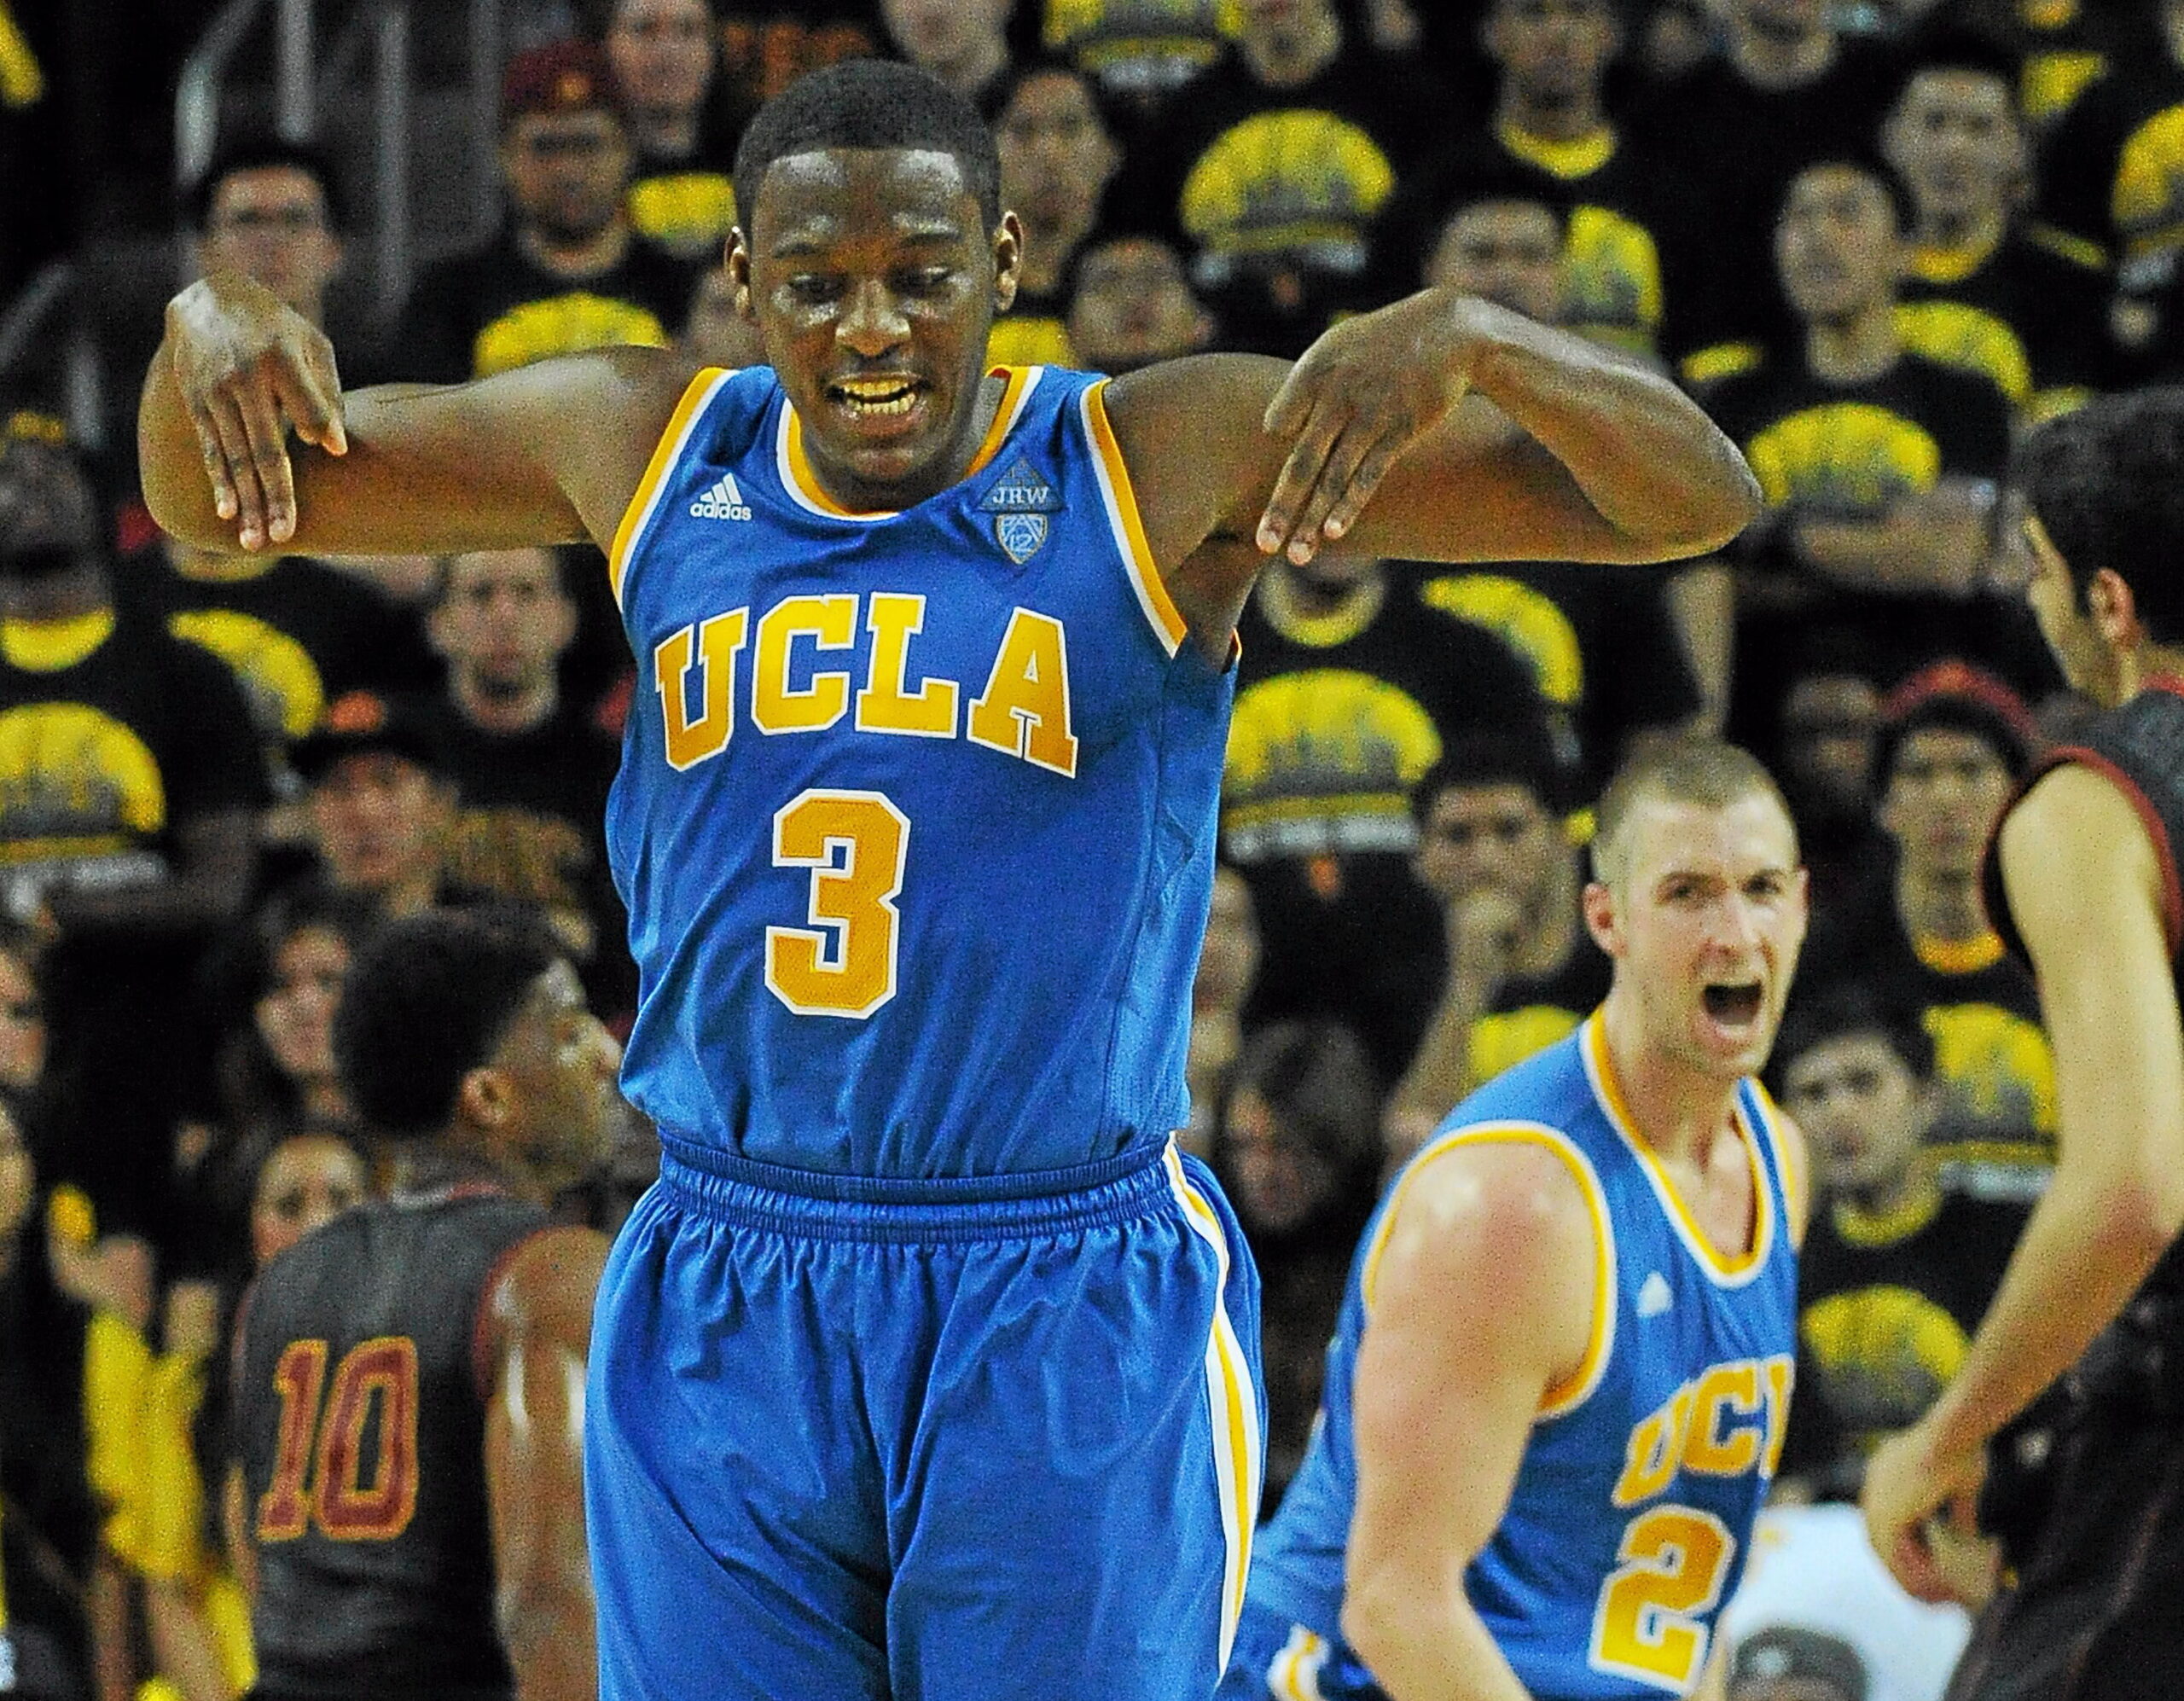 Adams during his stints at UCLA (Source: dailynews.com)